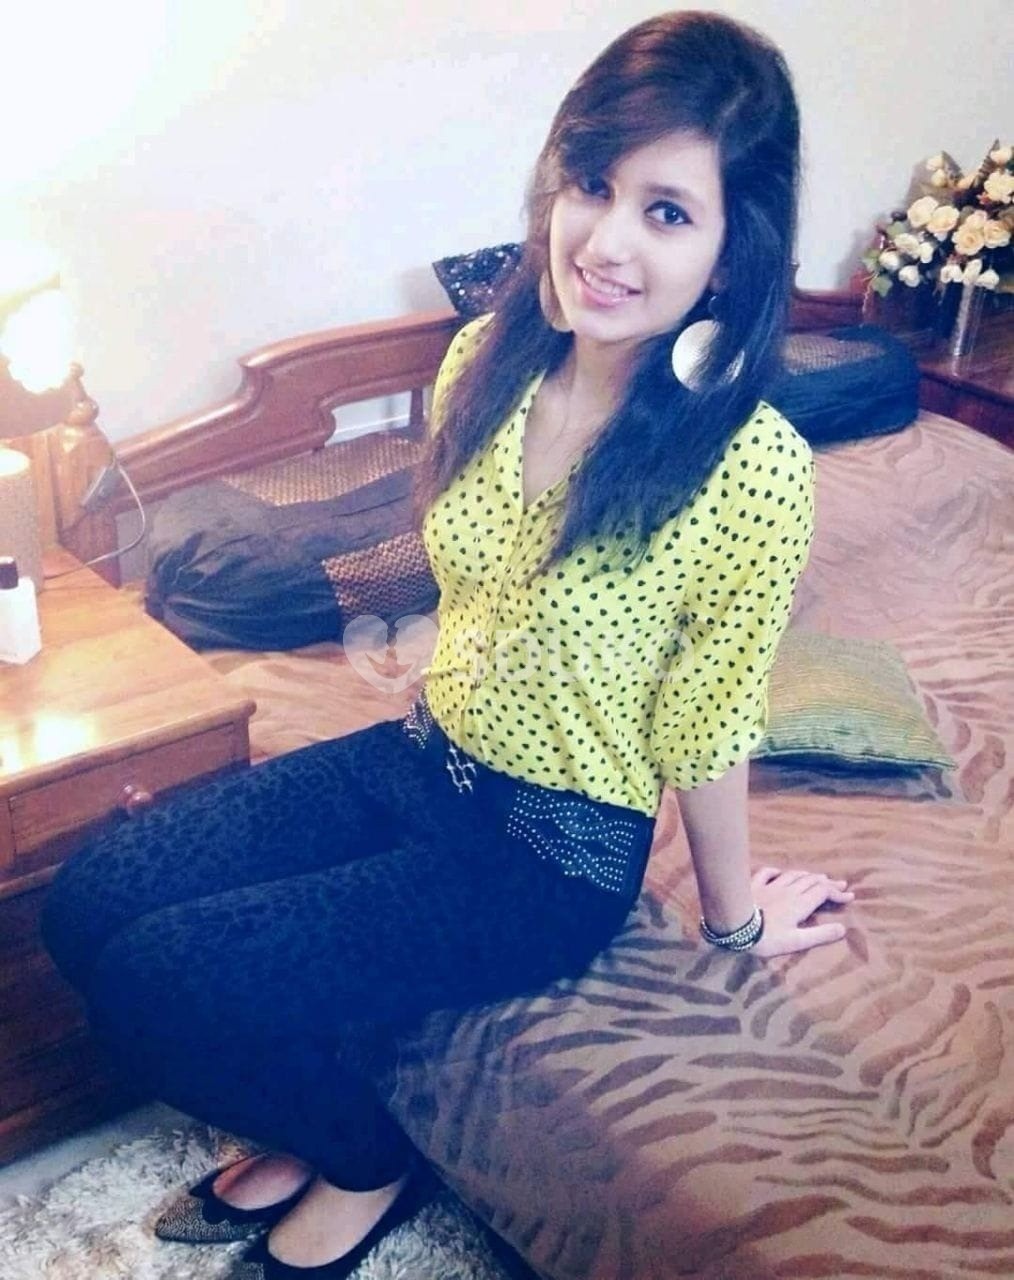 Call girl in coimbatore self and secure high profile girl available/